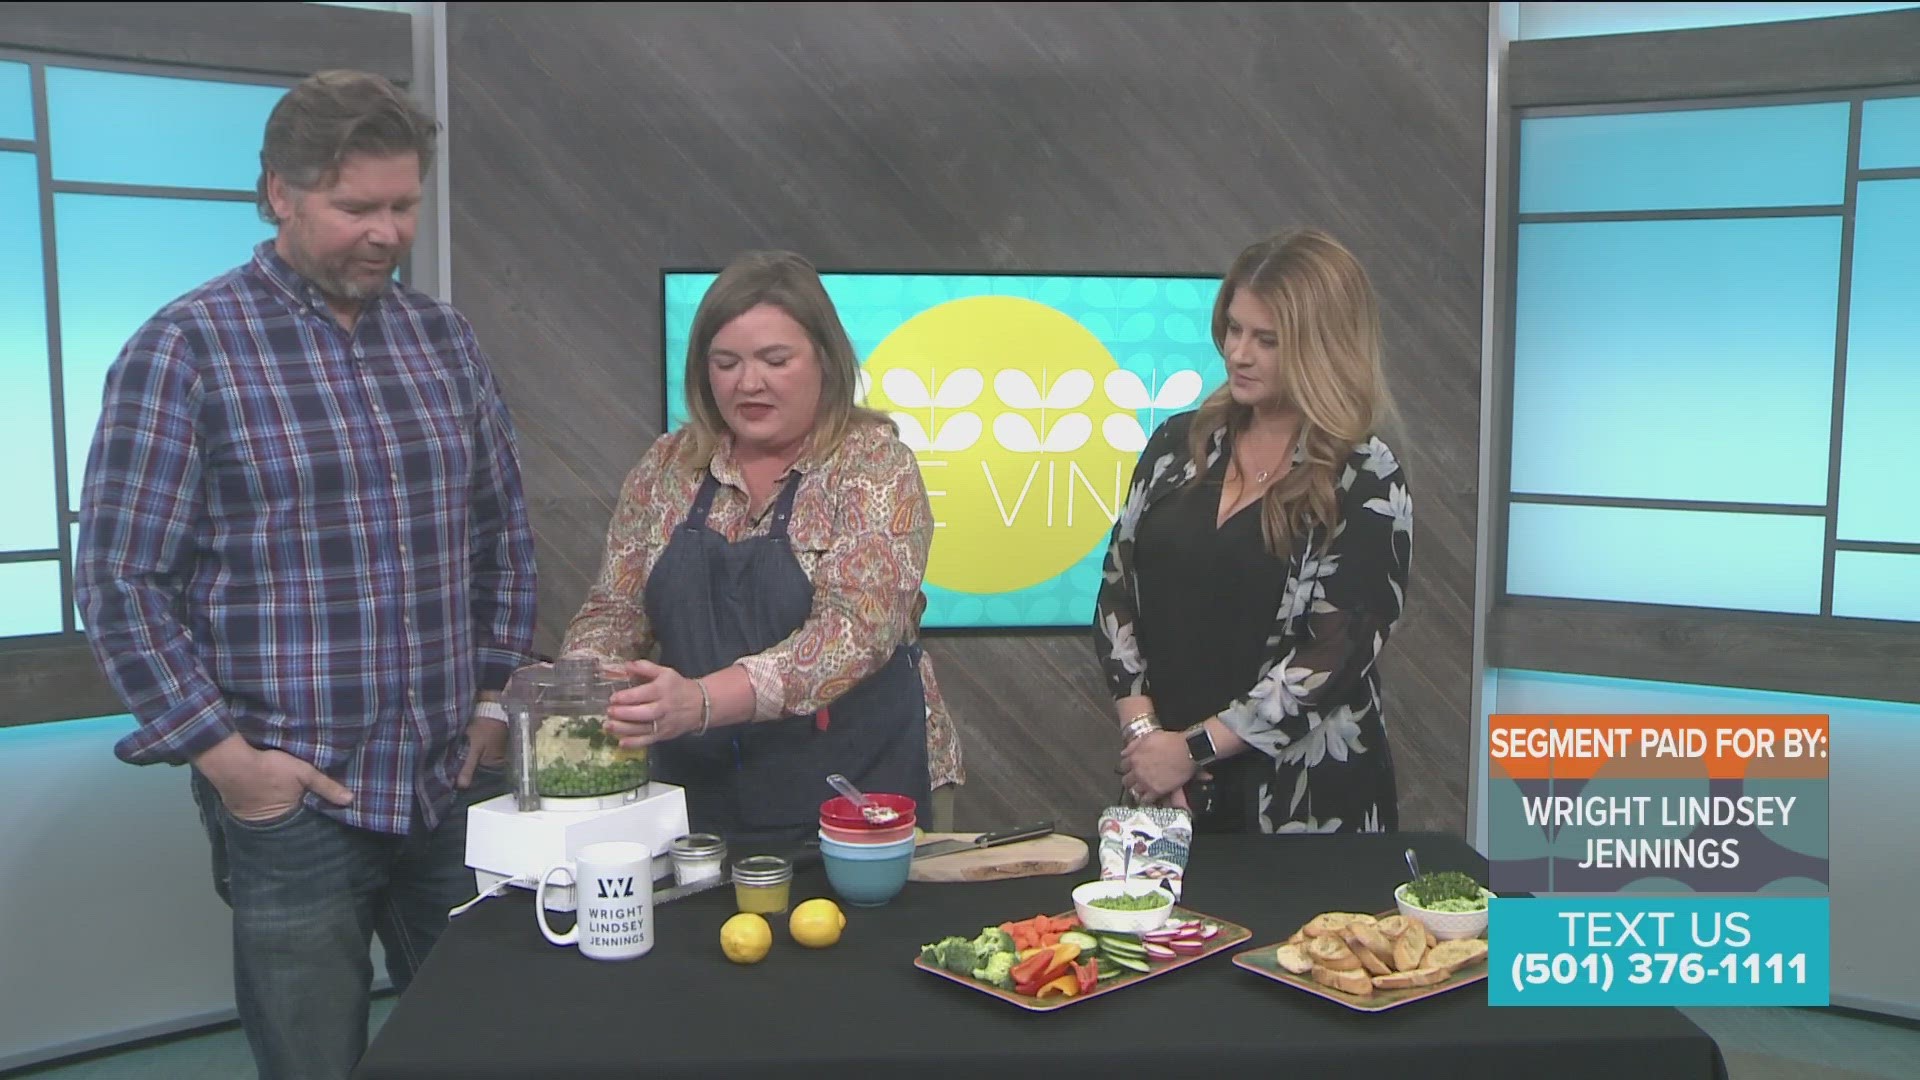 SEGMENT PAID FOR BY: Wright, Lindsey, Jennings. Learn more about Ease Supper Club on social media, @easesupperclub!